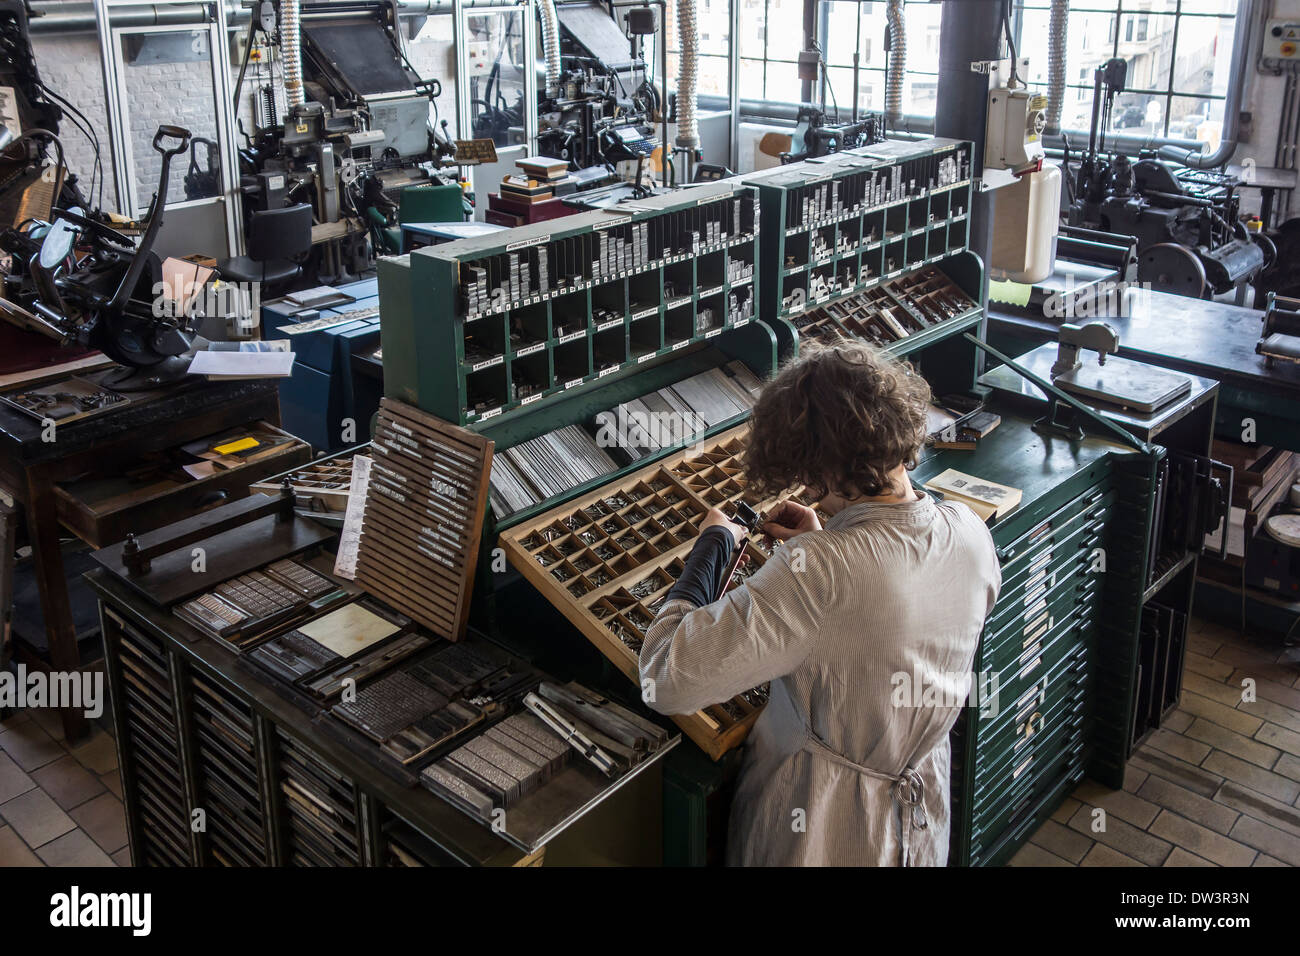 Typesetter at work in the composing room at printing business at MIAT, industrial archaeology museum, Ghent, Belgium Stock Photo